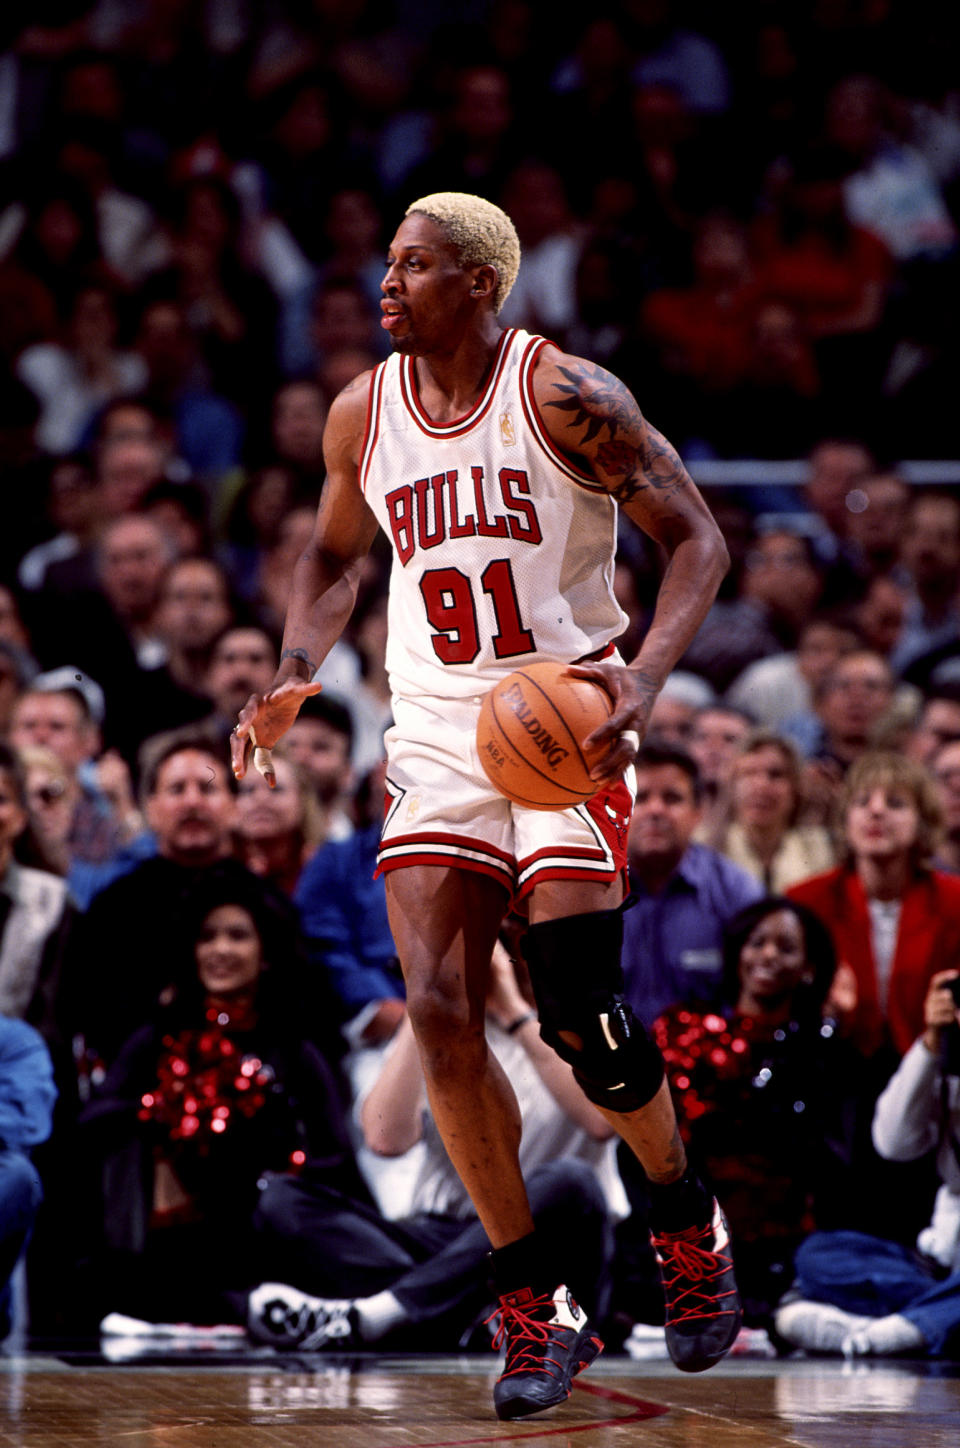 1997: Dennis Rodman #91 of the Chicago Bulls in action during the a Bulls game versus the Indiana Pacers at the United Center in Chicago, IL. (Photo by John Biever/Icon Sportswire via Getty Images)